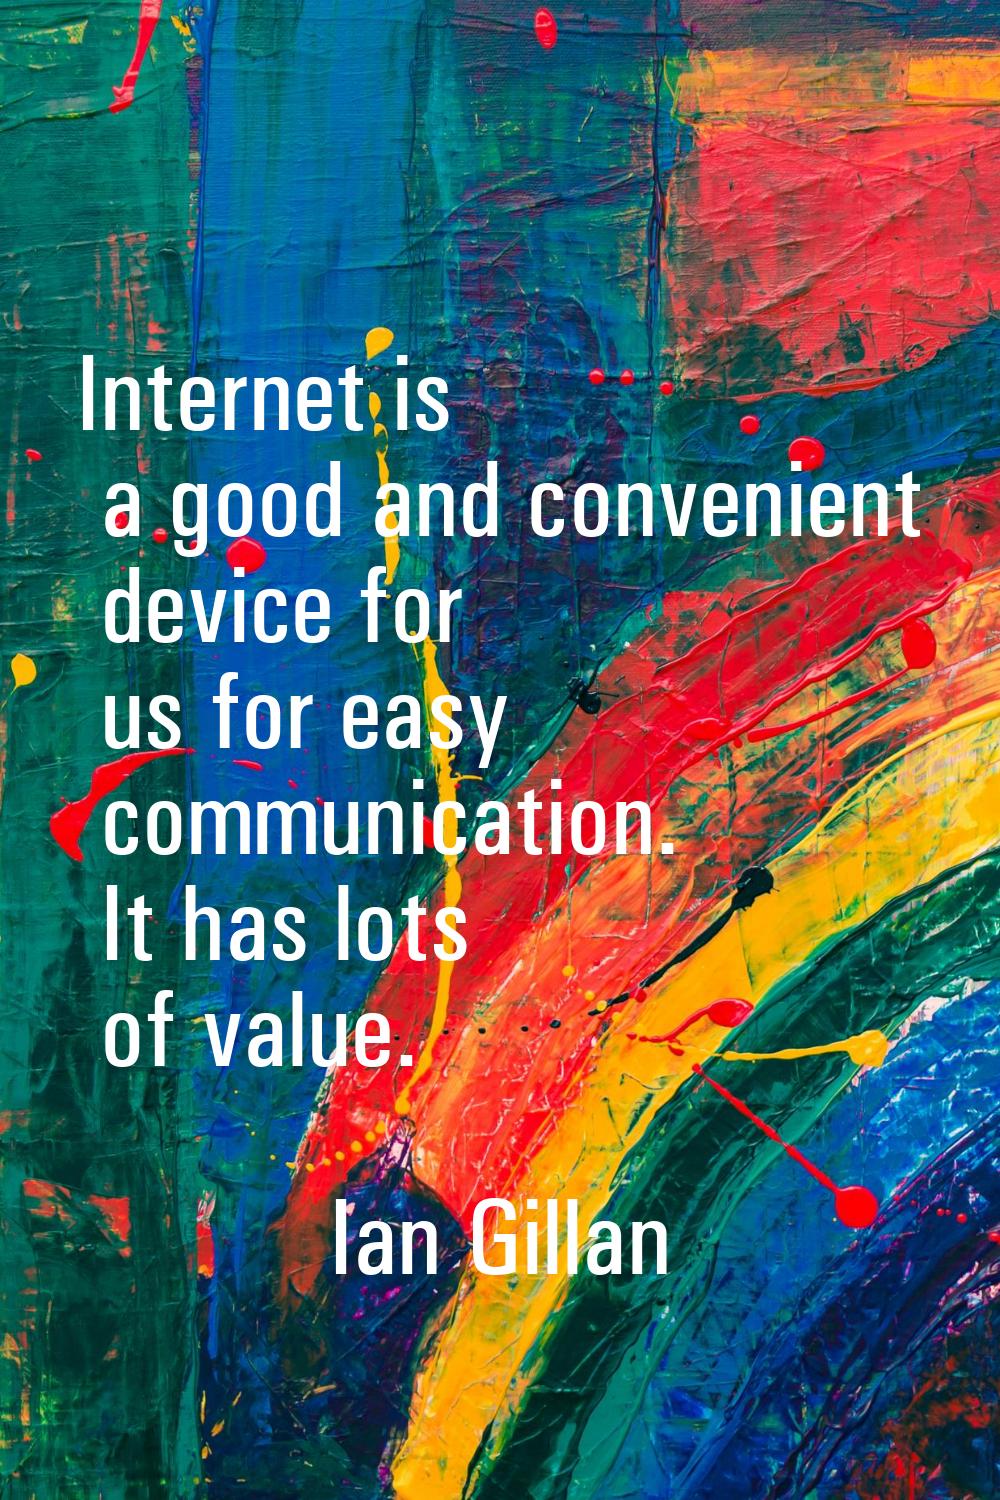 Internet is a good and convenient device for us for easy communication. It has lots of value.